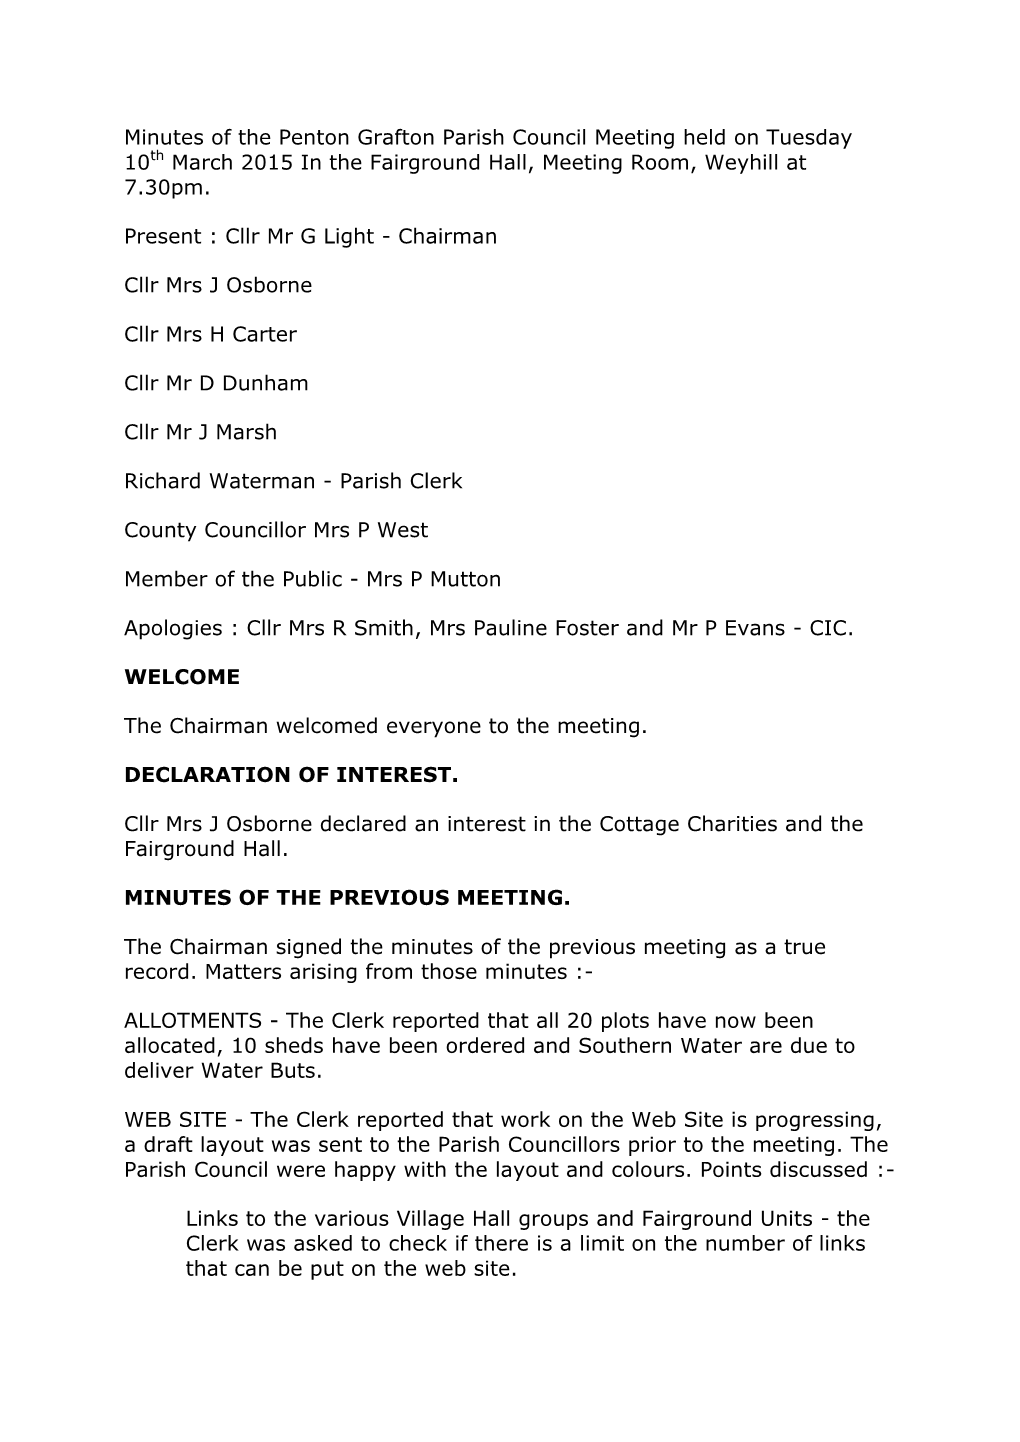 Minutes of the Penton Grafton Parish Council Meeting Held on Tuesday 10Th March 2015 in the Fairground Hall, Meeting Room, Weyhill at 7.30Pm